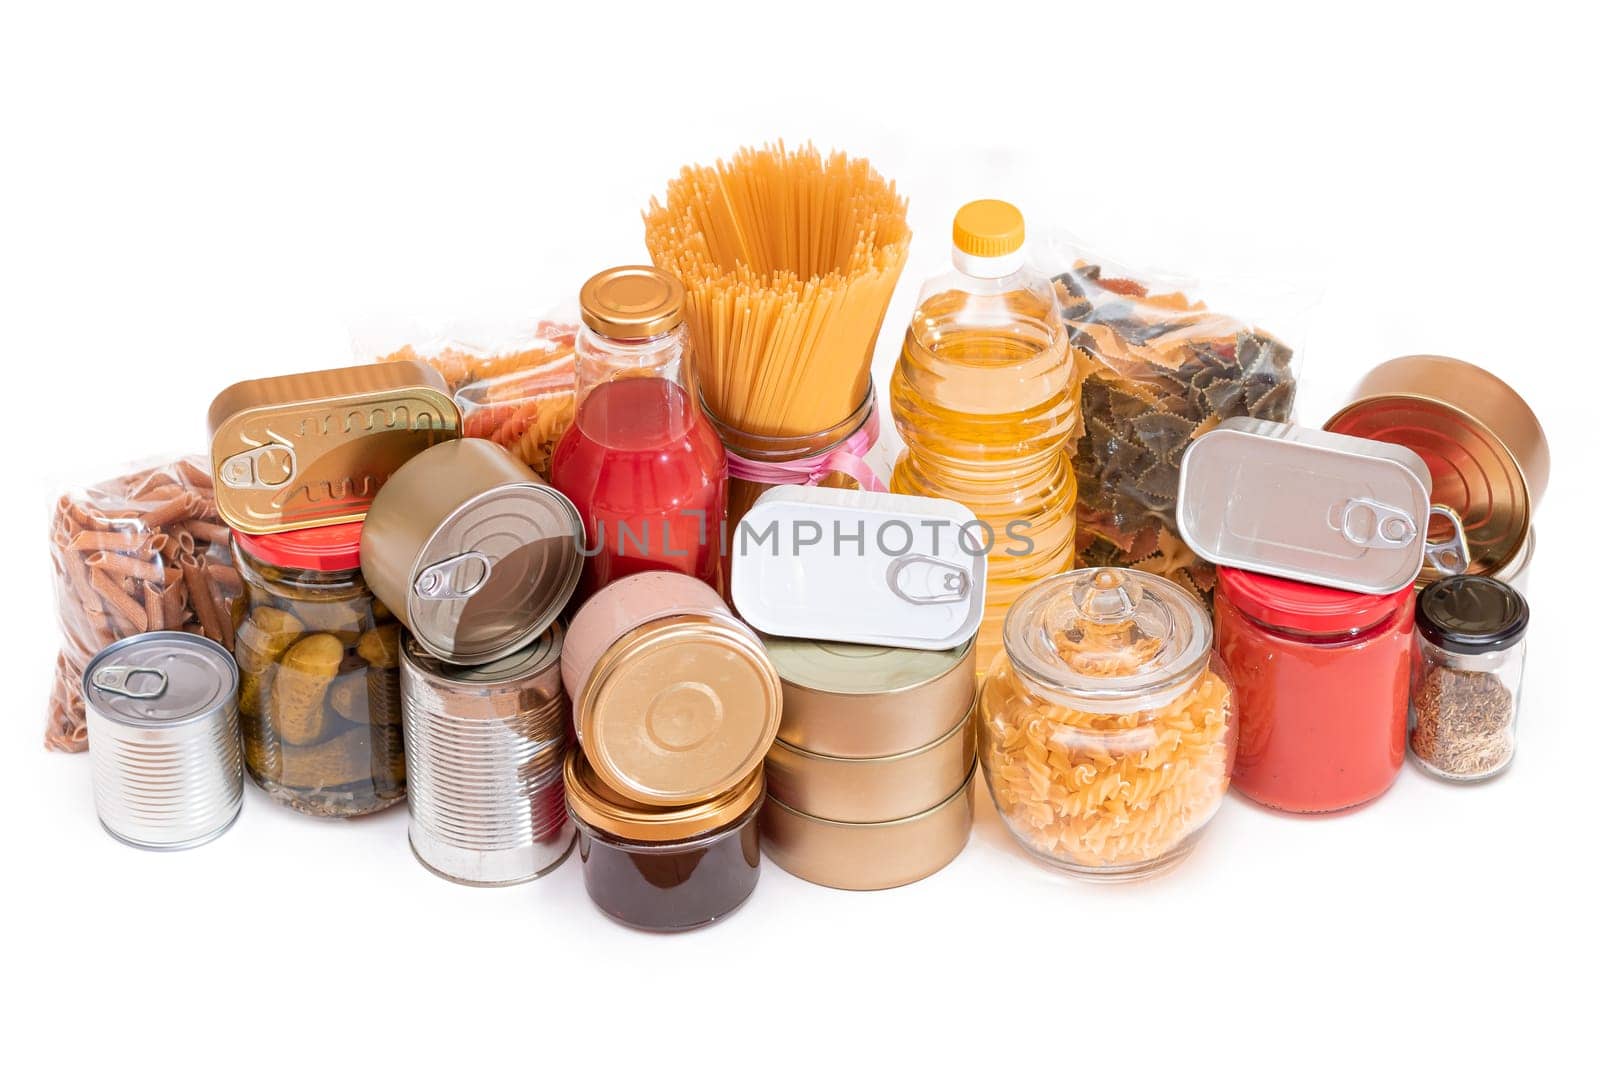 Food Reserves: Canned Food, Spaghetti, Tomato Juice, Pasta and Grocery - Isolated on White Background. Emergency Food Storage in Case of Crisis. Strategic Food Supplies - Isolation